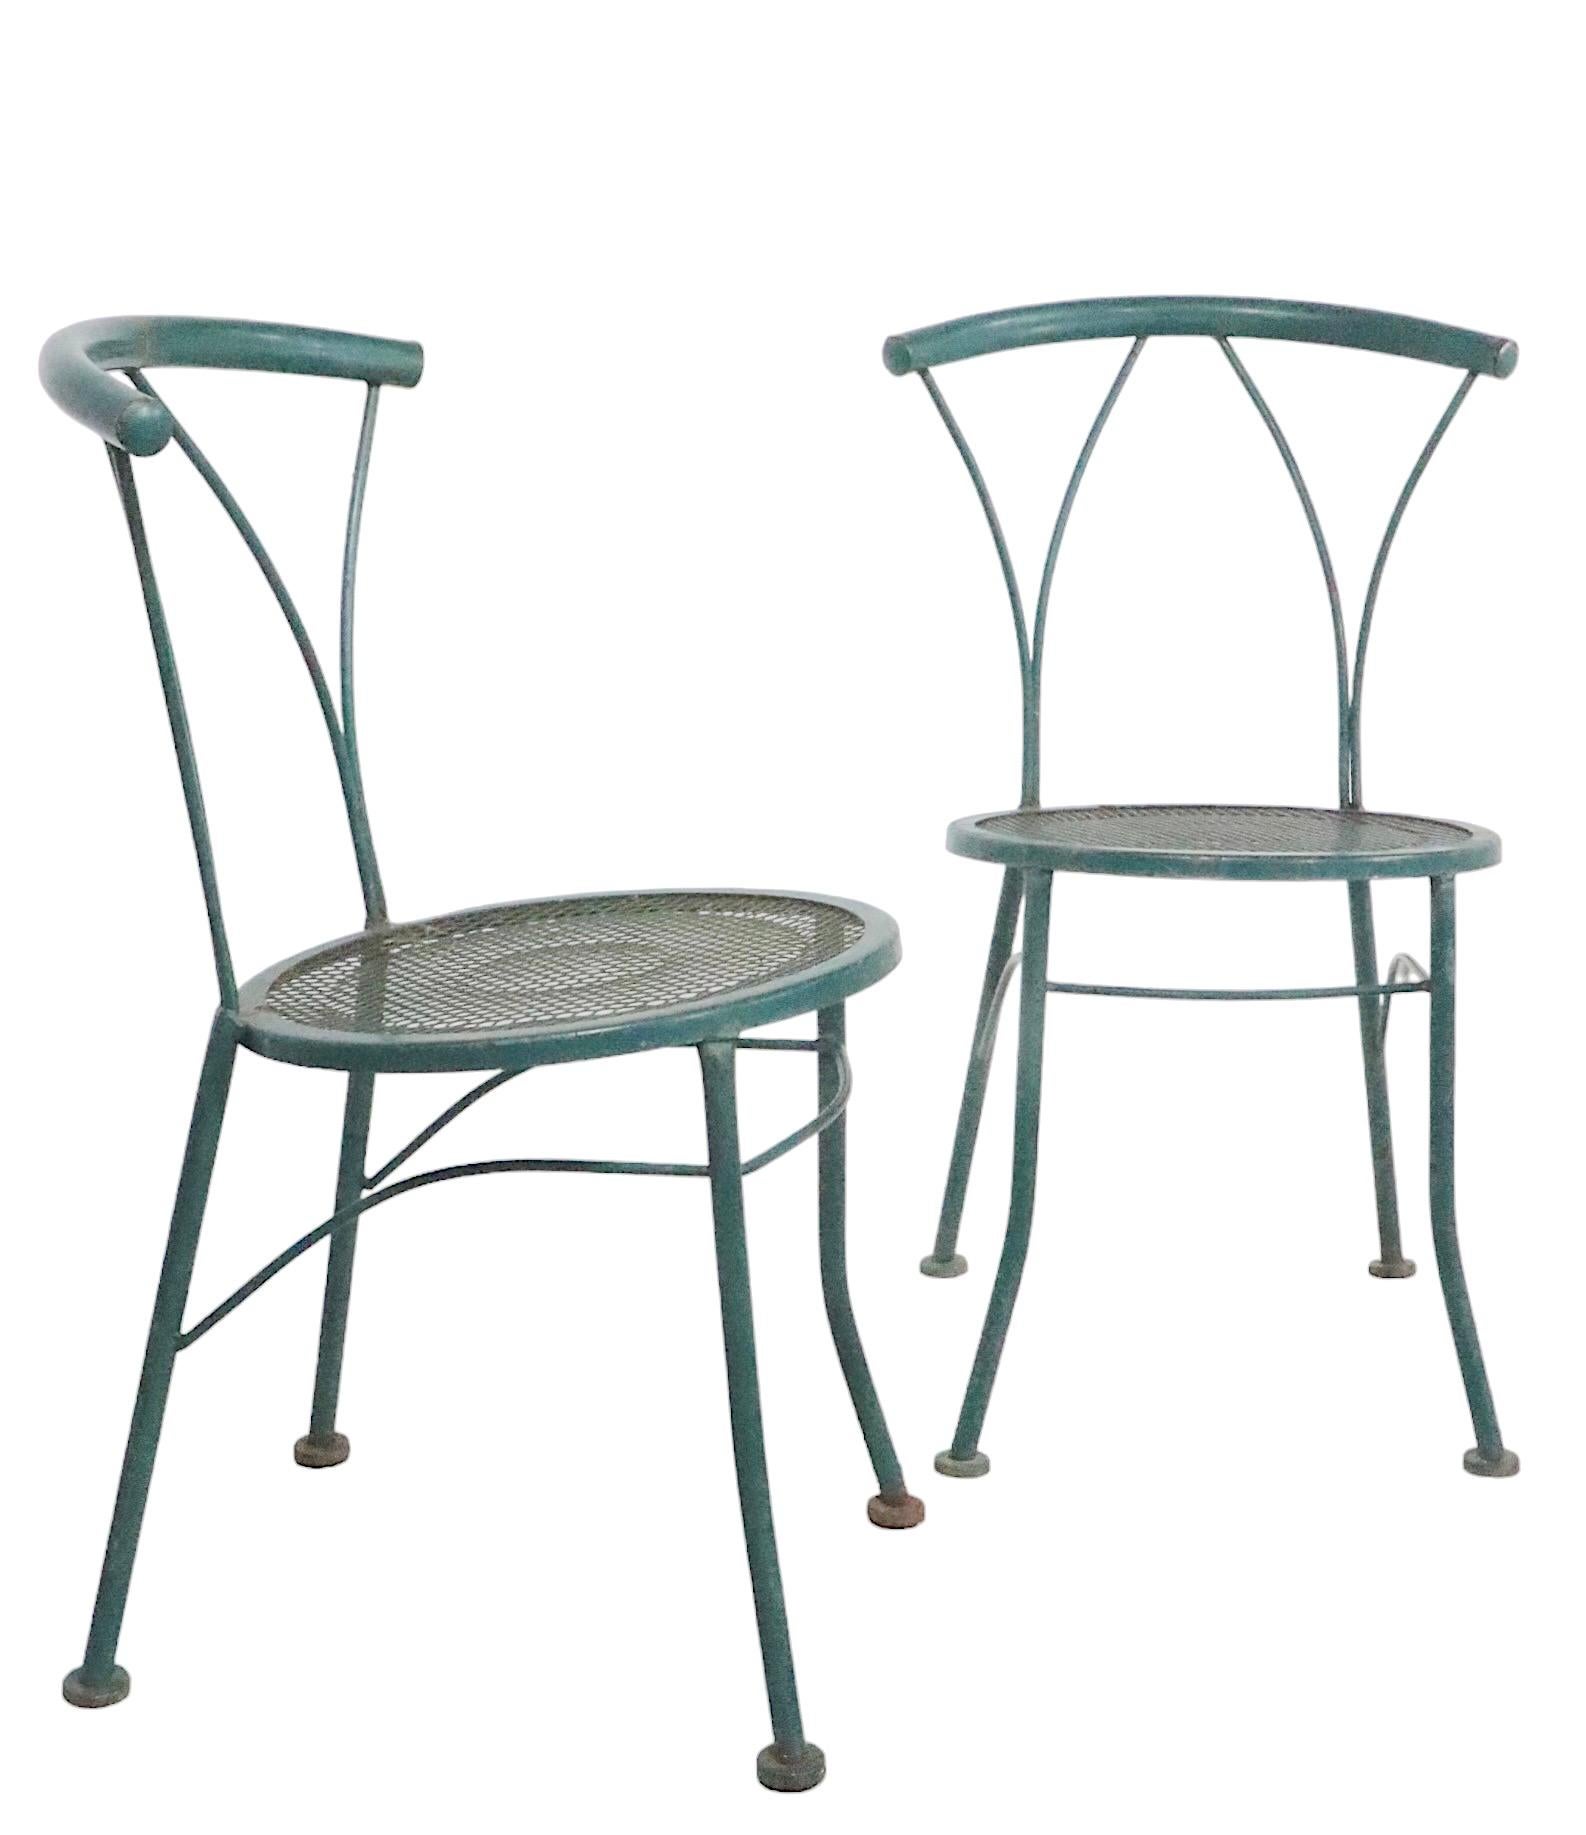 Pr. Wrought Iron and Metal Mesh Garden Patio Poolside Bistro Cafe  Dining Chairs For Sale 4